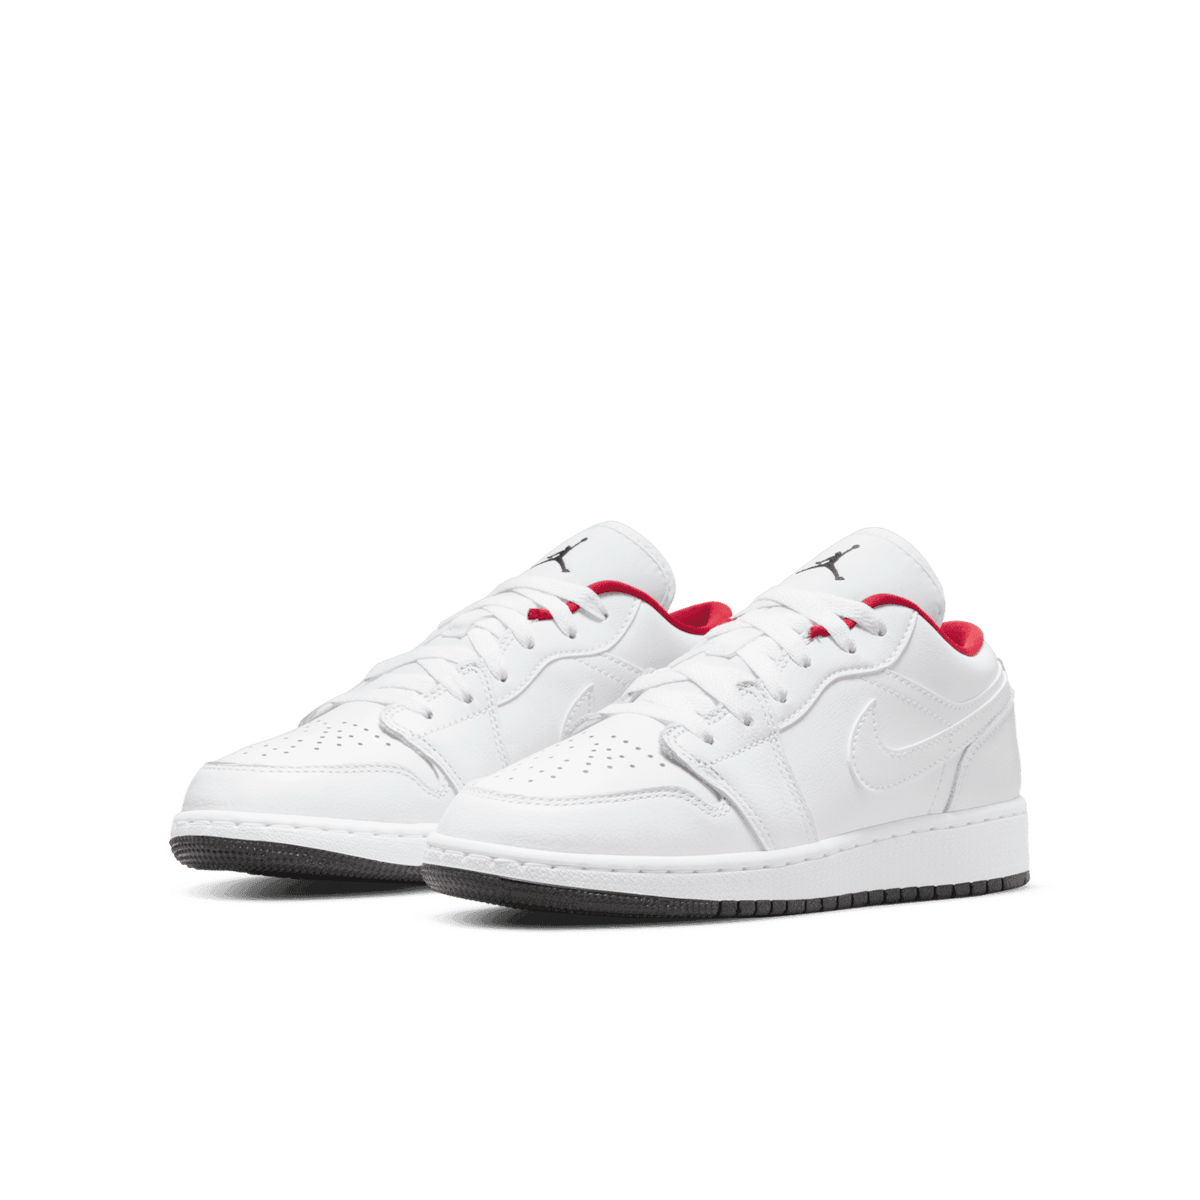 Jordan 1 Low White Red (GS) Angle 2